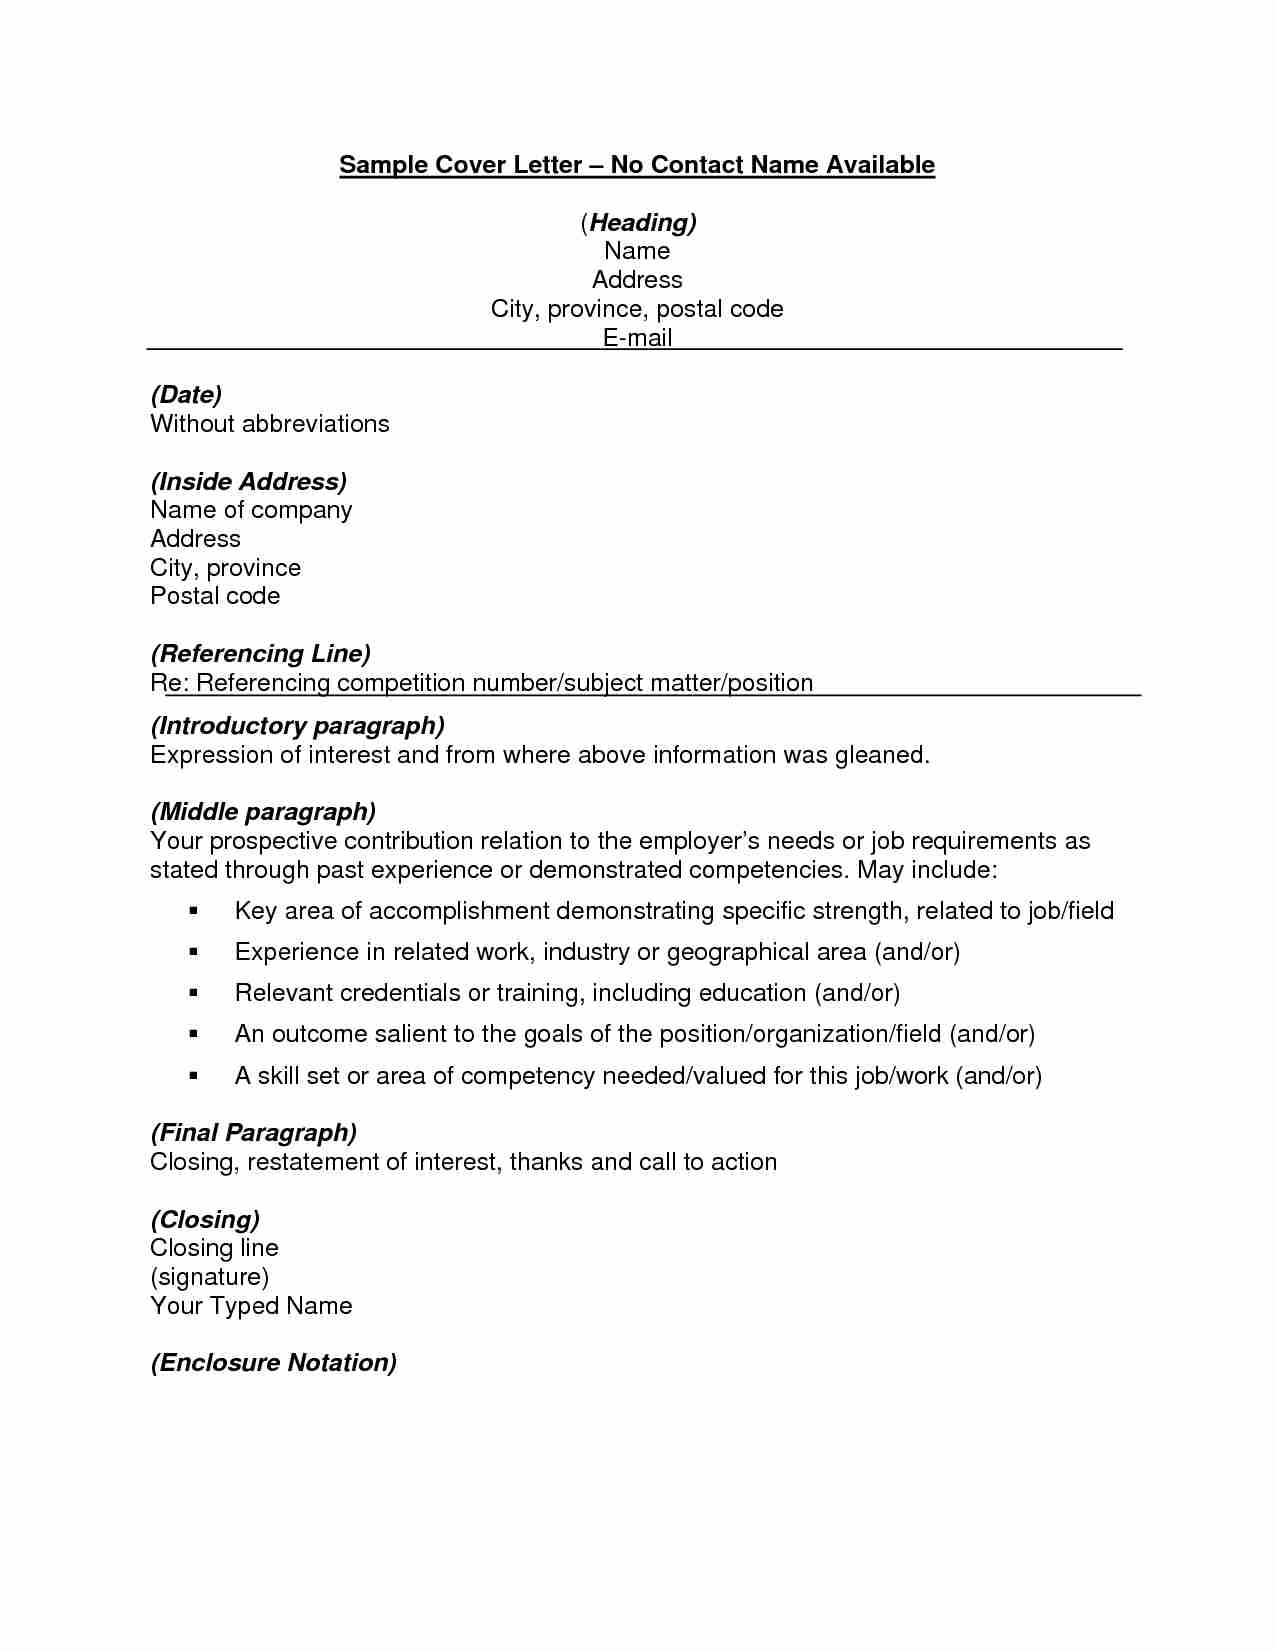 Cover Letter No Contact Free Resume Templates Portfolio for dimensions 1275 X 1650